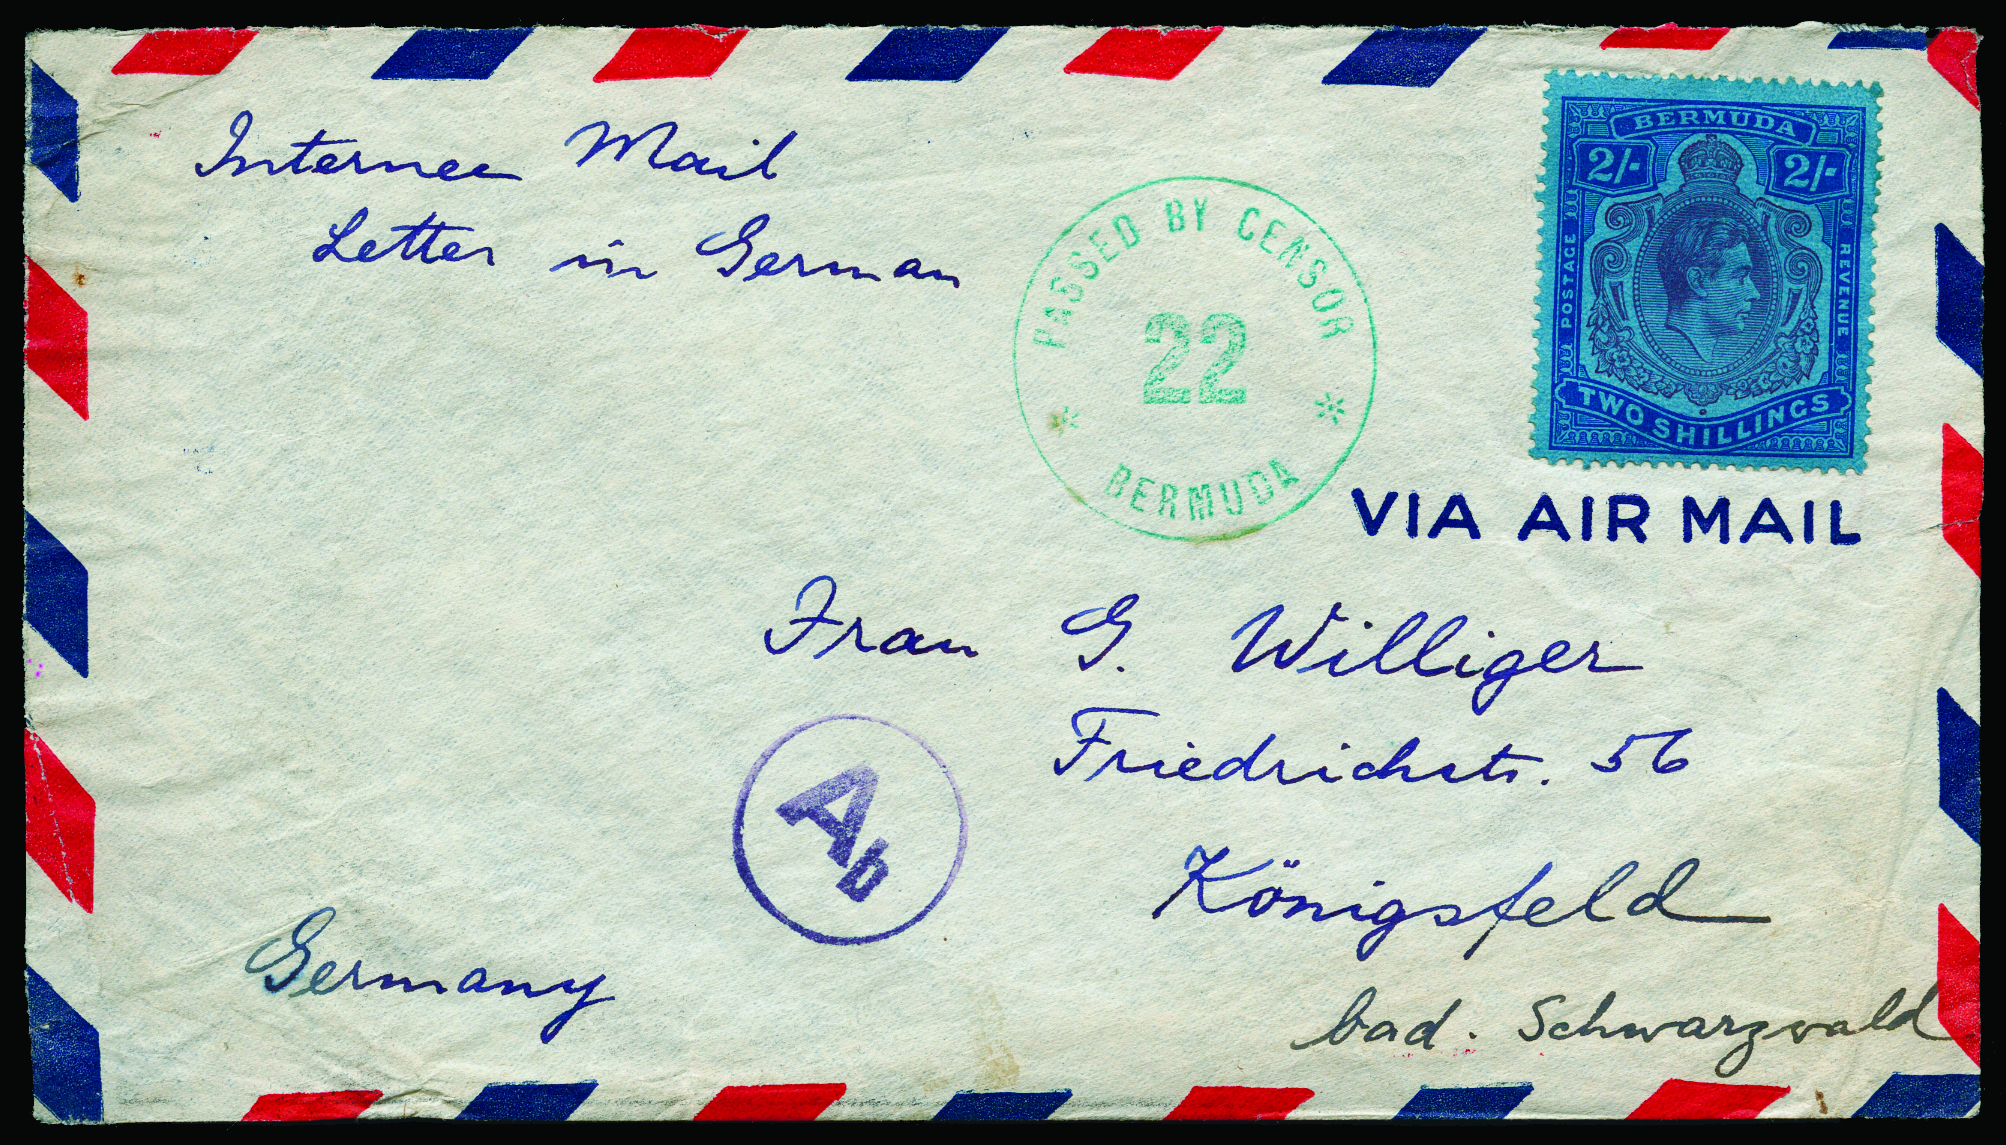 Internee Mail: Undated envelope to Germany with m/s "Internee Mail/Letter in German" from "K.